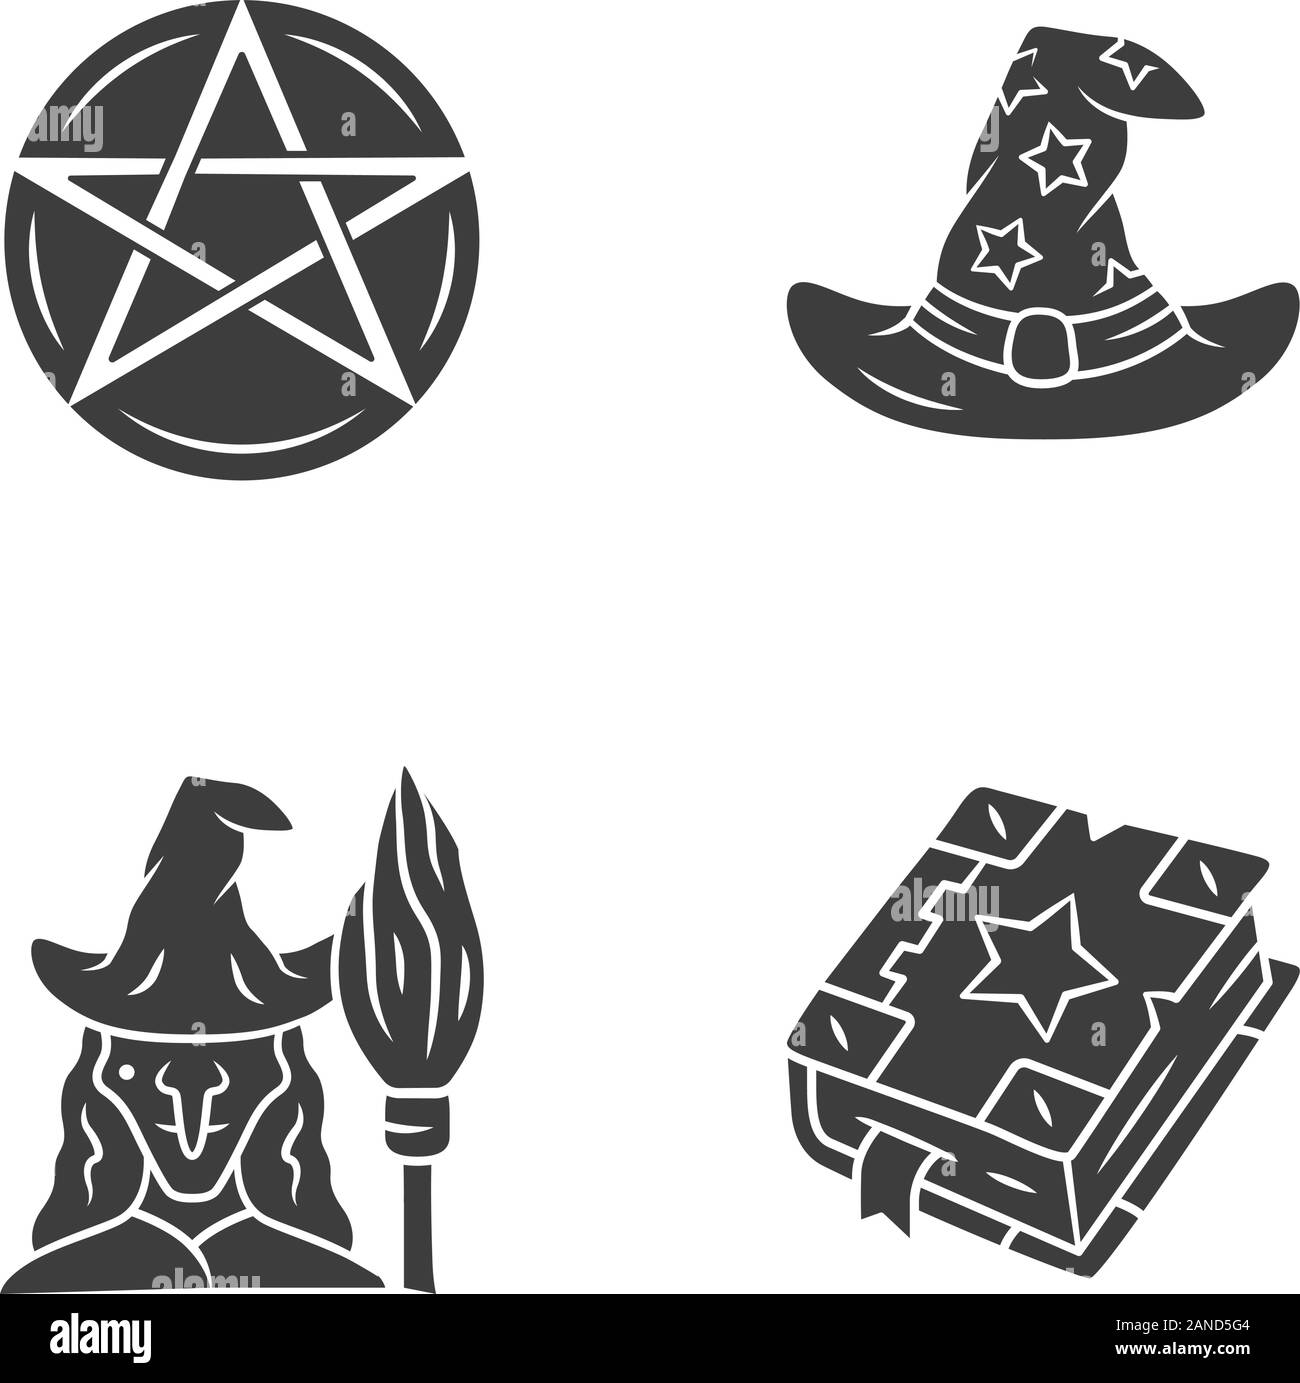 Magic glyph icons set. Pentagram, wizard hat, witch, spell book. Witchcraft, occult ritual items. Mystery objects. Silhouette symbols. Vector isolated Stock Vector